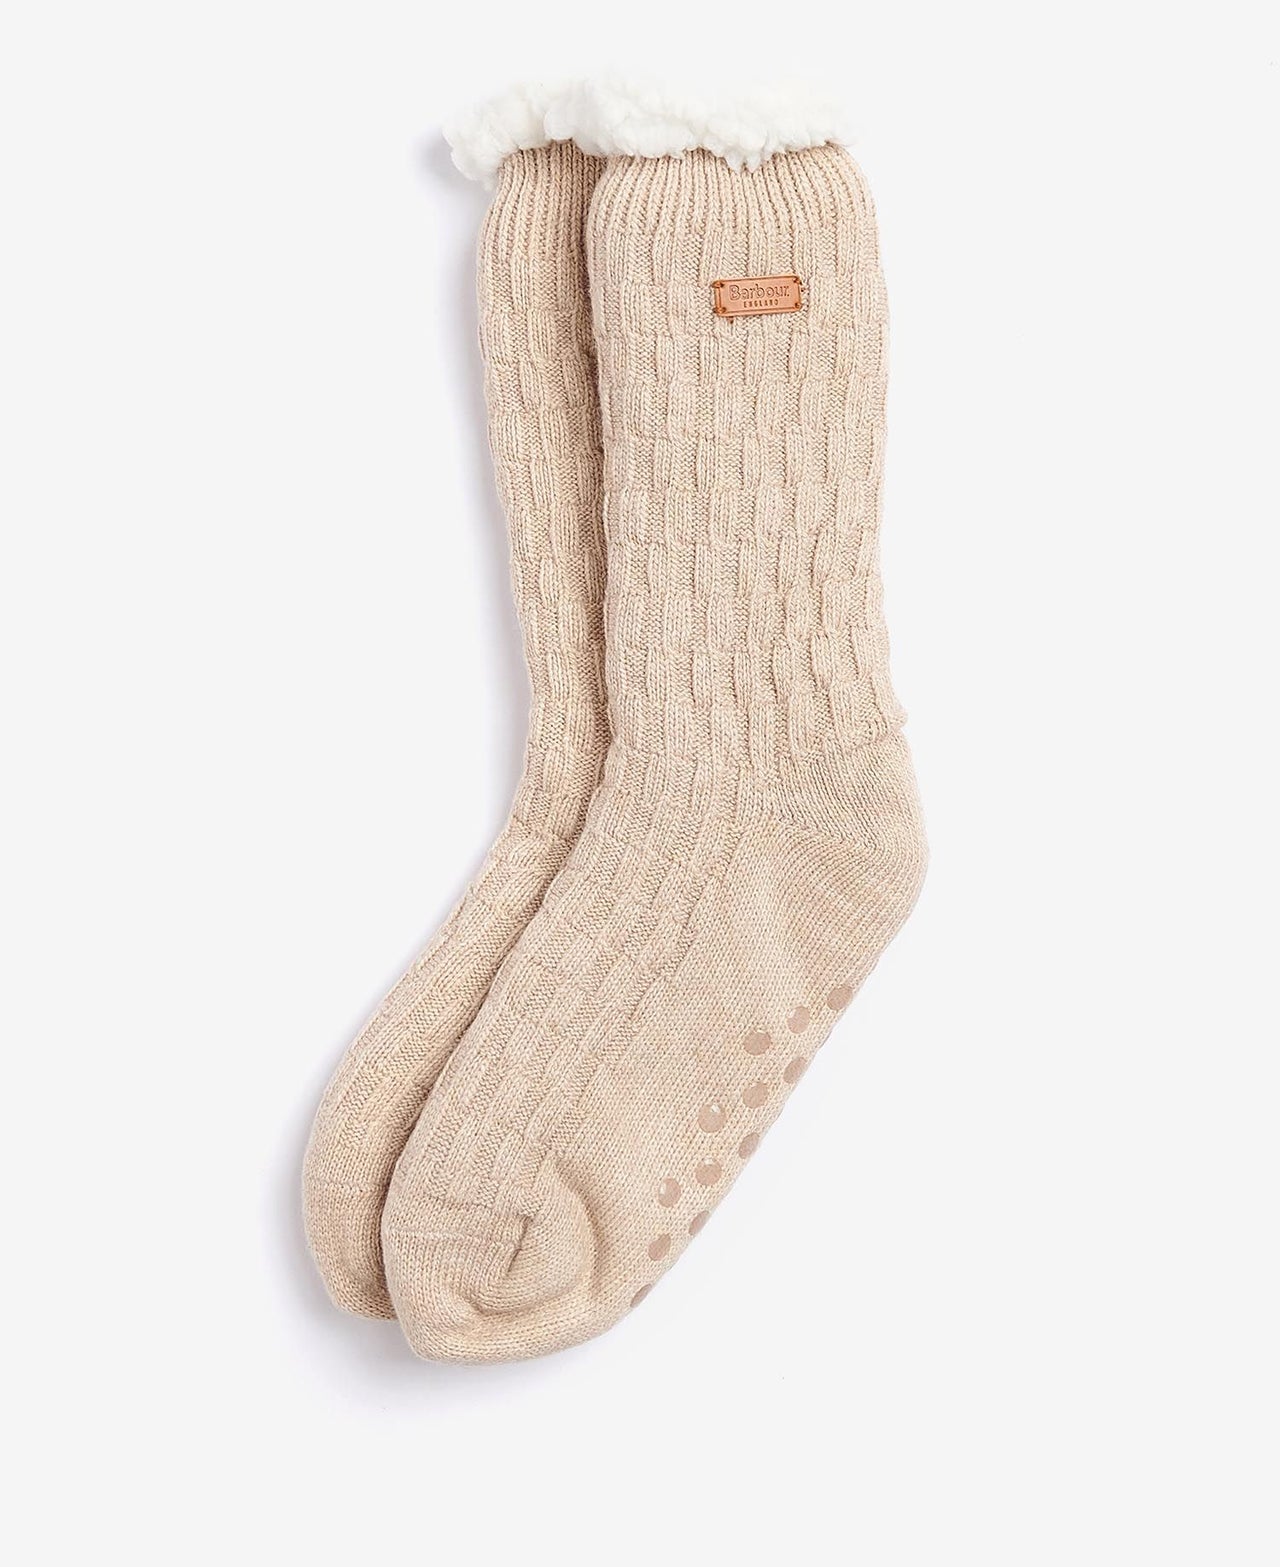 Barbour Cable Knit Lounge Socks